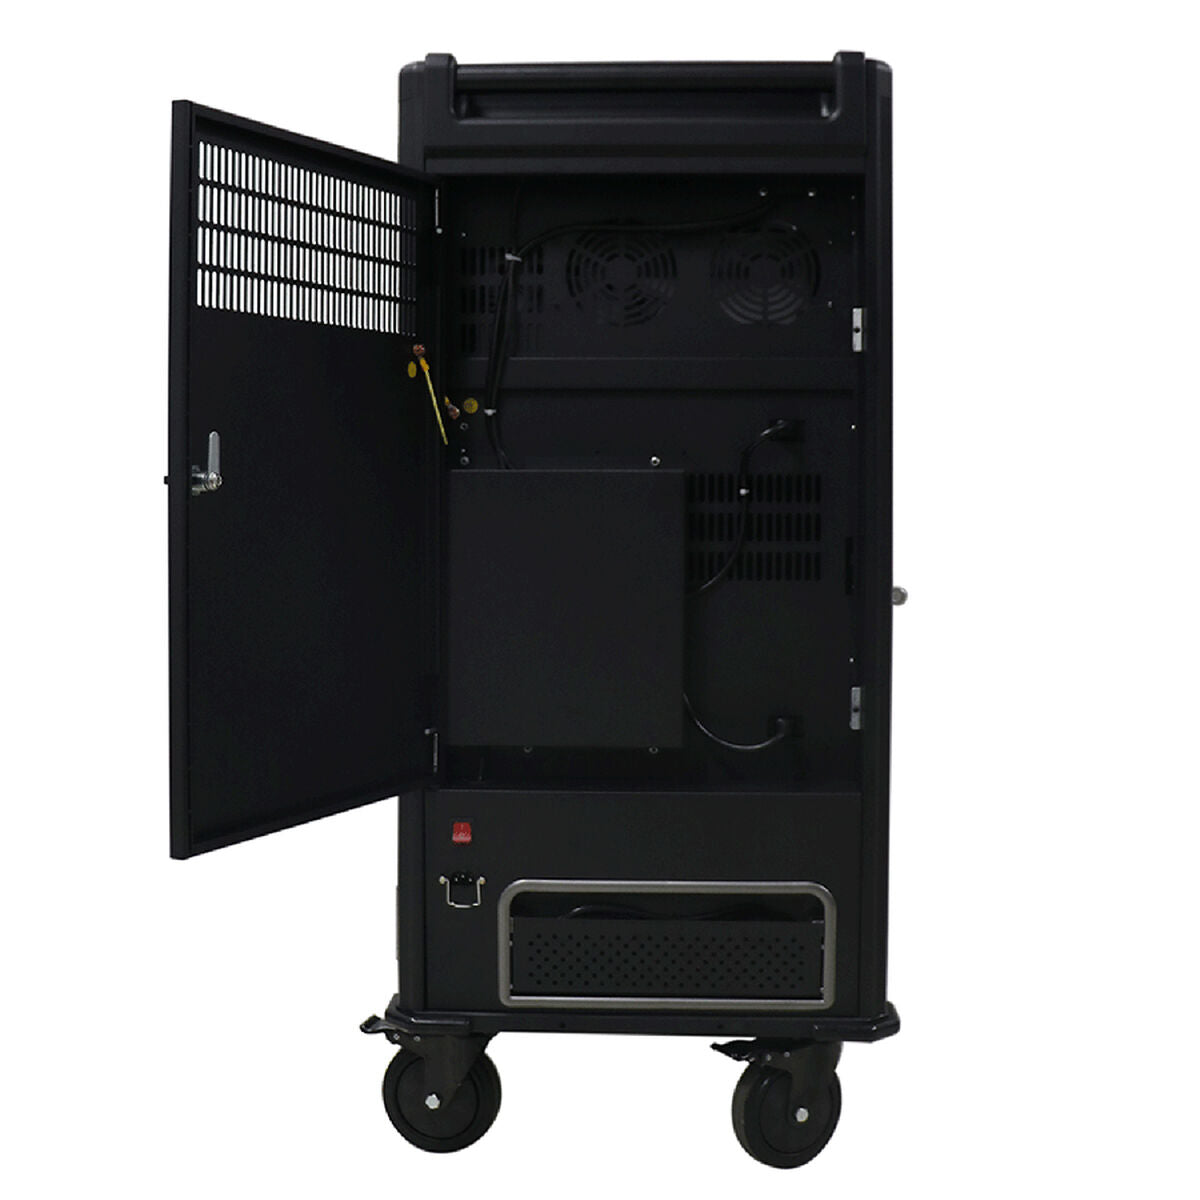 Wall-mounted Rack Cabinet V7 CHGCT30USBCPD-1E, V7, Computing, Accessories, wall-mounted-rack-cabinet-v7-chgct30usbcpd-1e, Brand_V7, category-reference-2609, category-reference-2803, category-reference-2828, category-reference-t-19685, category-reference-t-19908, Condition_NEW, furniture, networks/wiring, organisation, Price_+ 1000, Teleworking, RiotNook